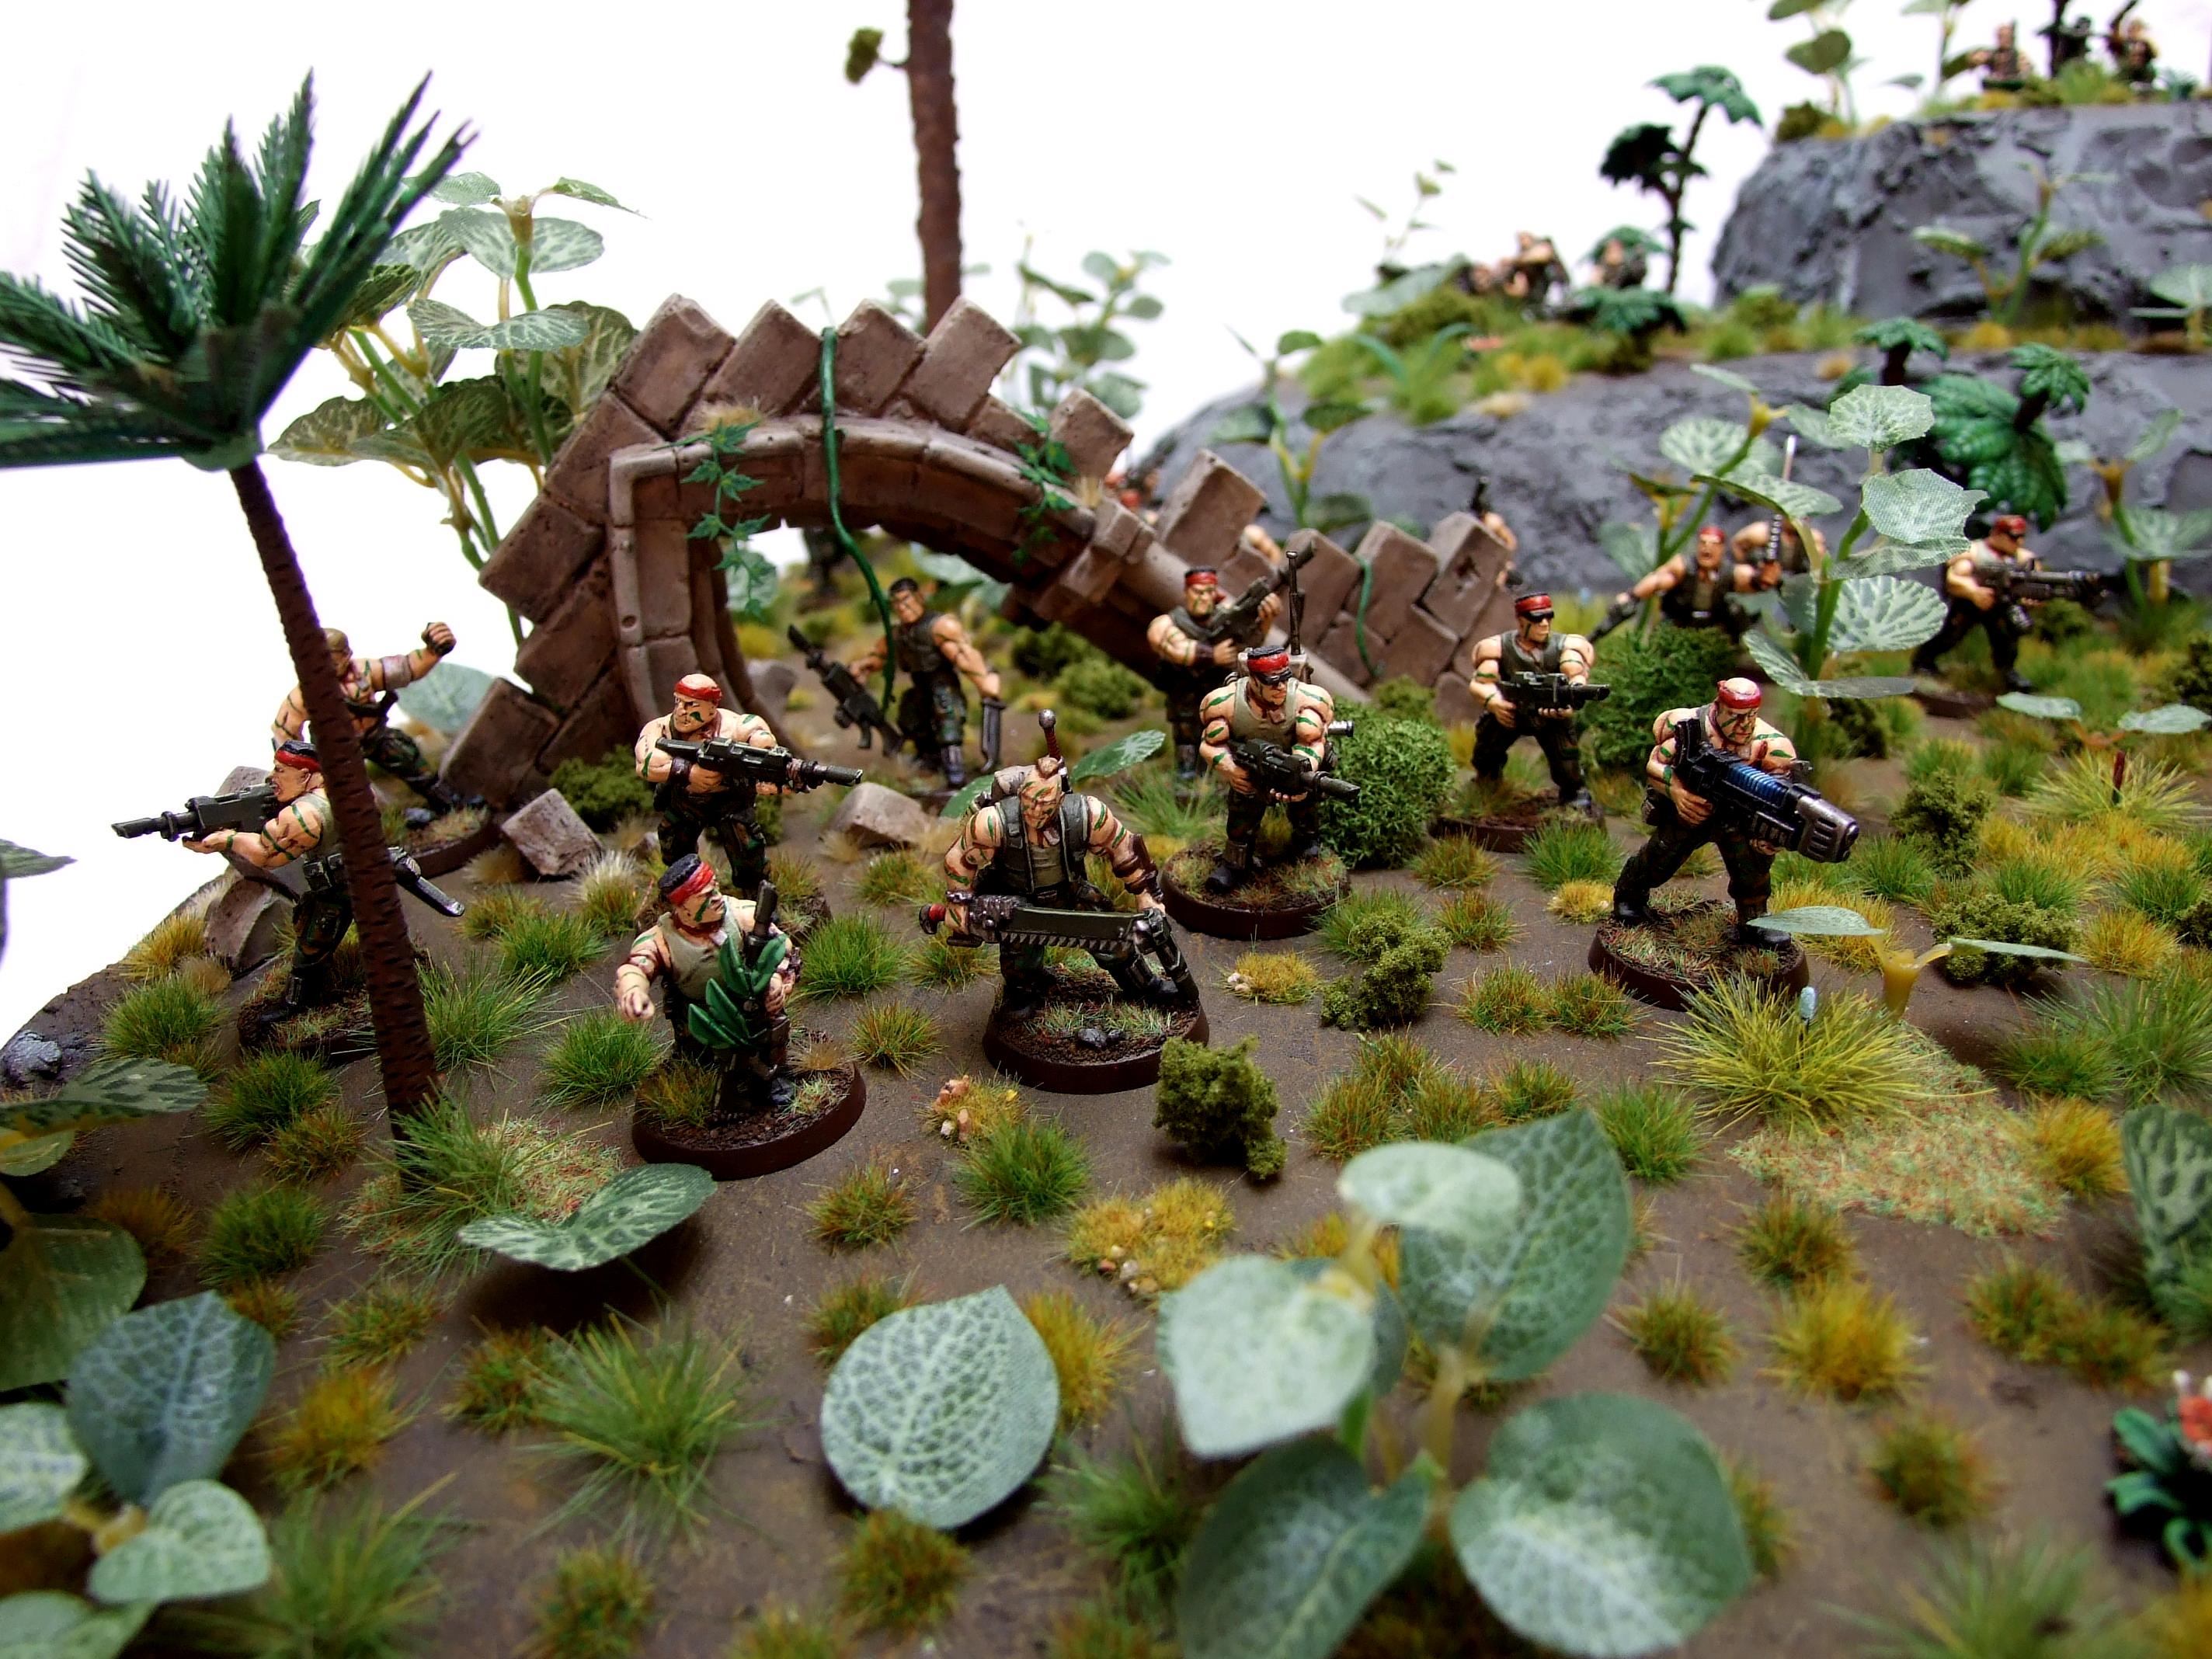 2013, Aop, Armies On Parade, Catachan, Imperial Guard, Jungle, Jungle Fighter, Jungle Scenery, Warhammer 40,000, Winner